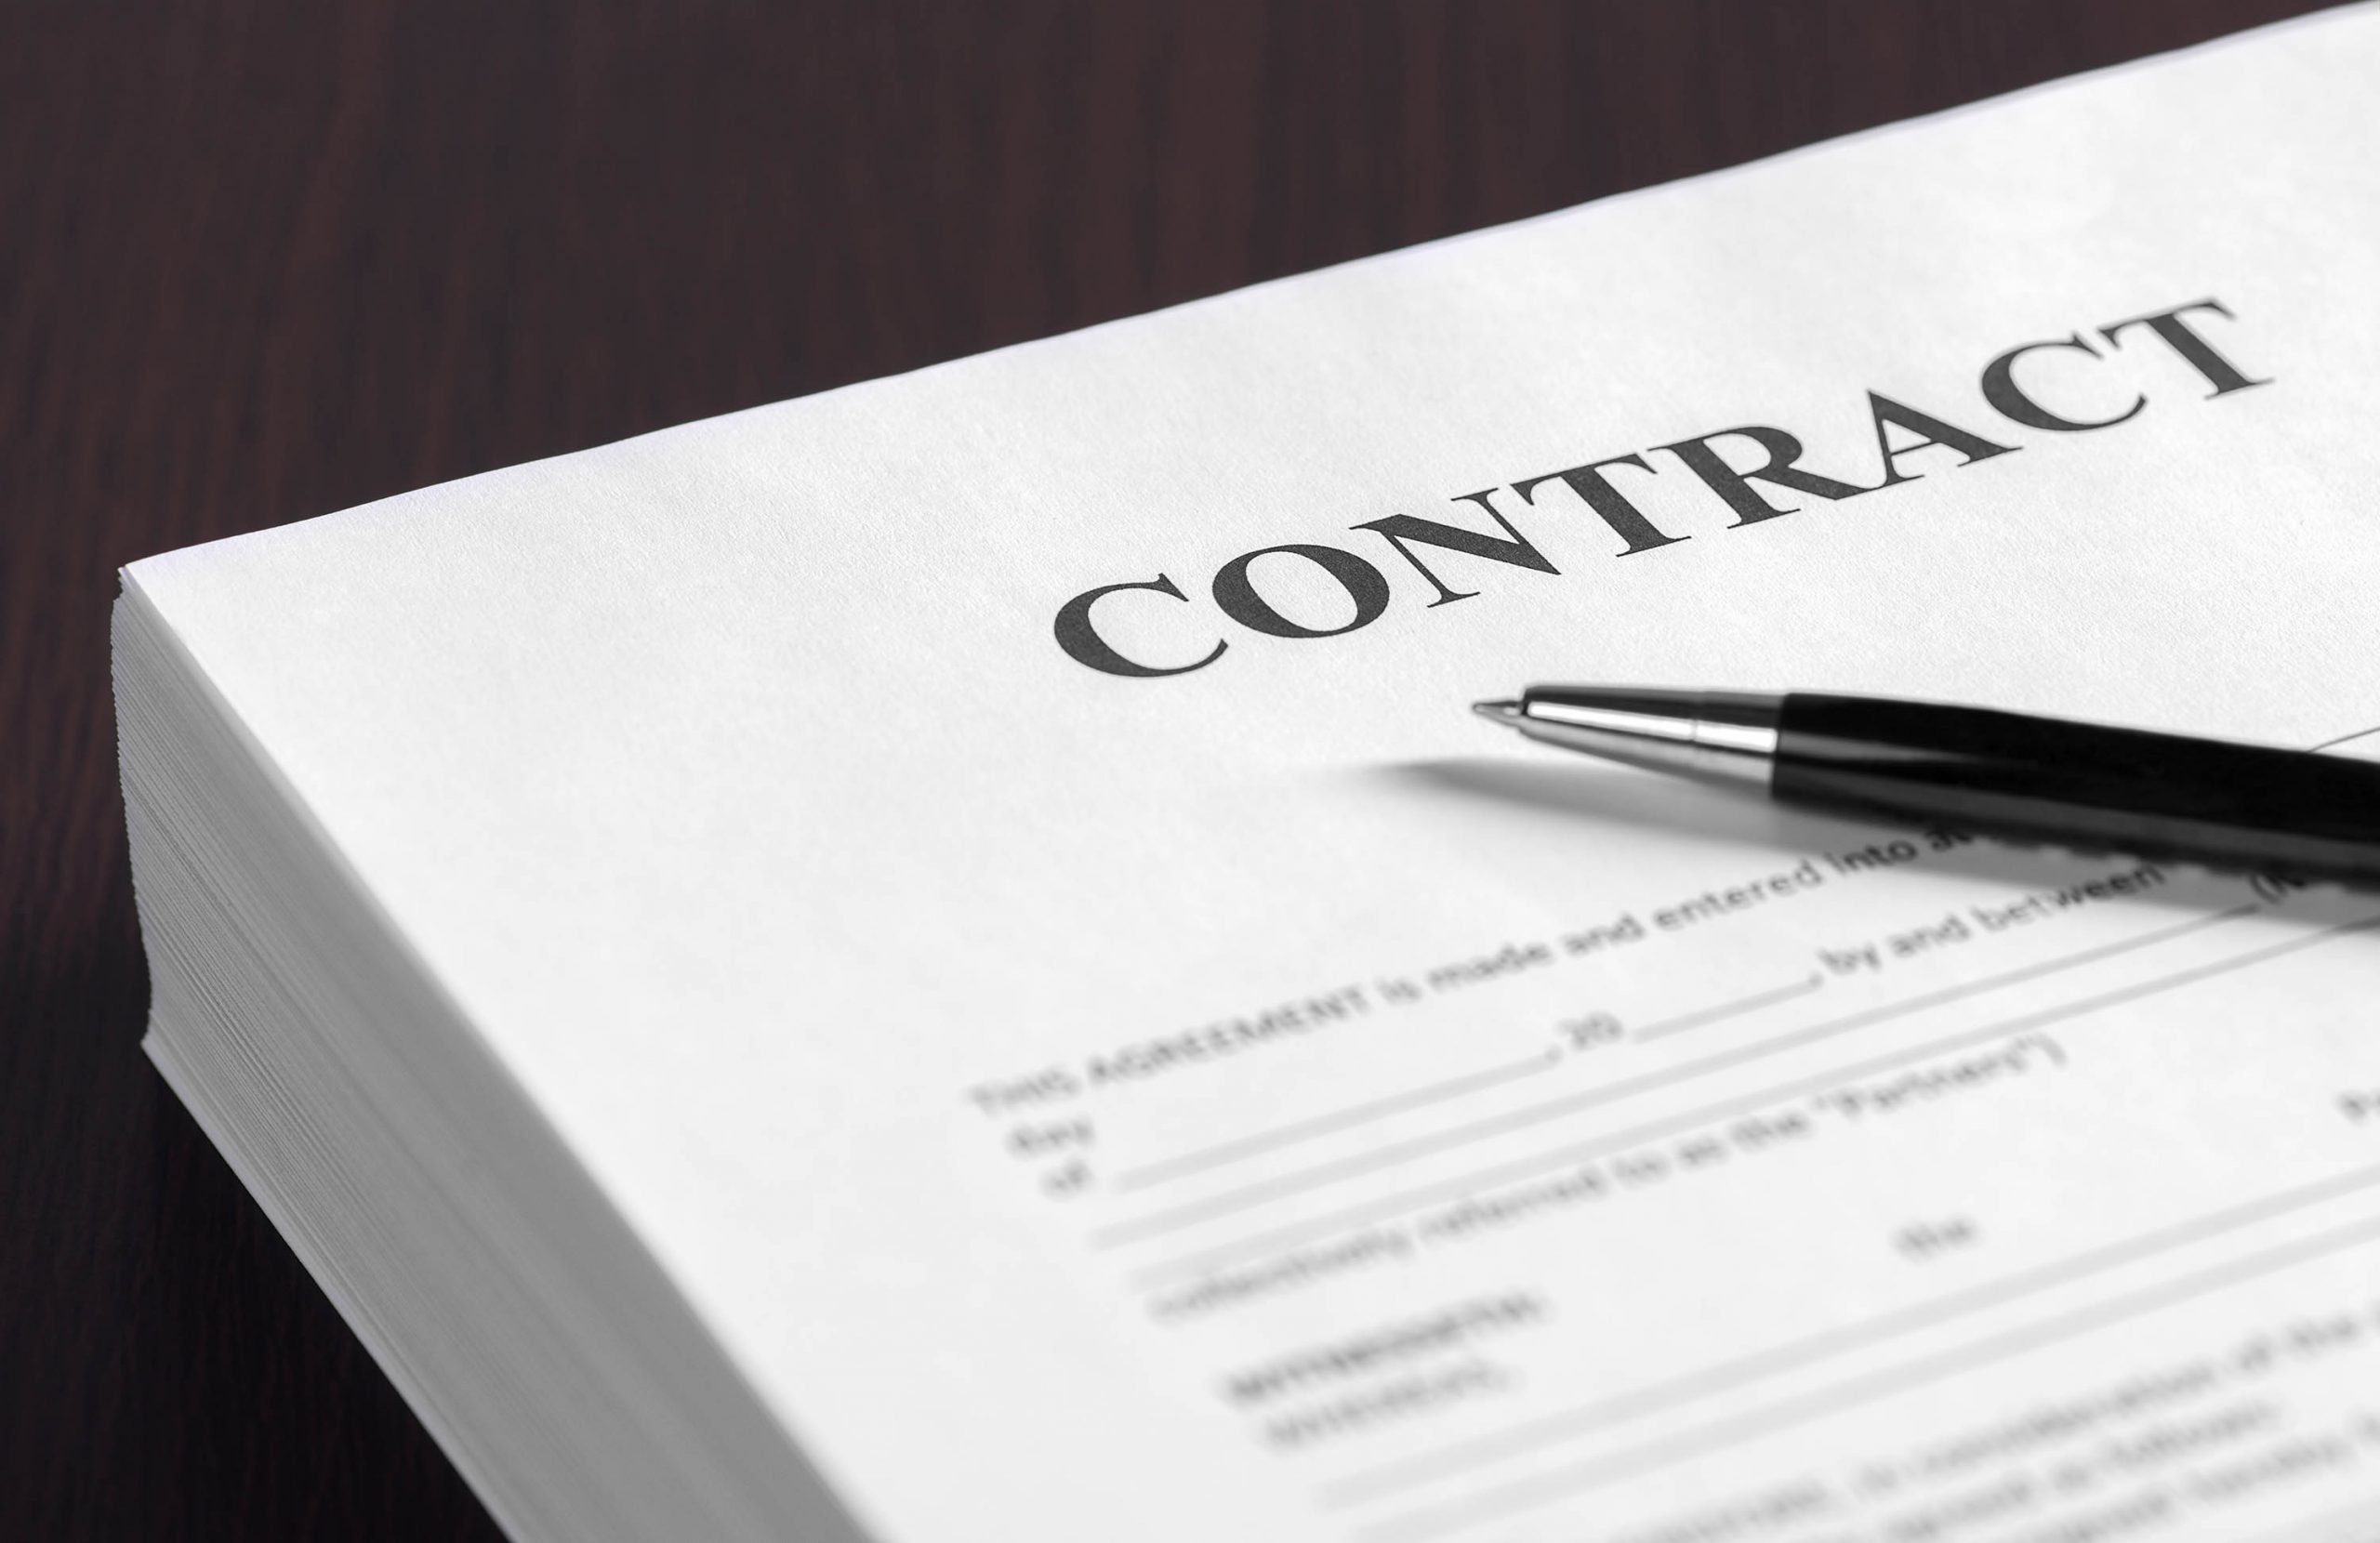 Porn star contract